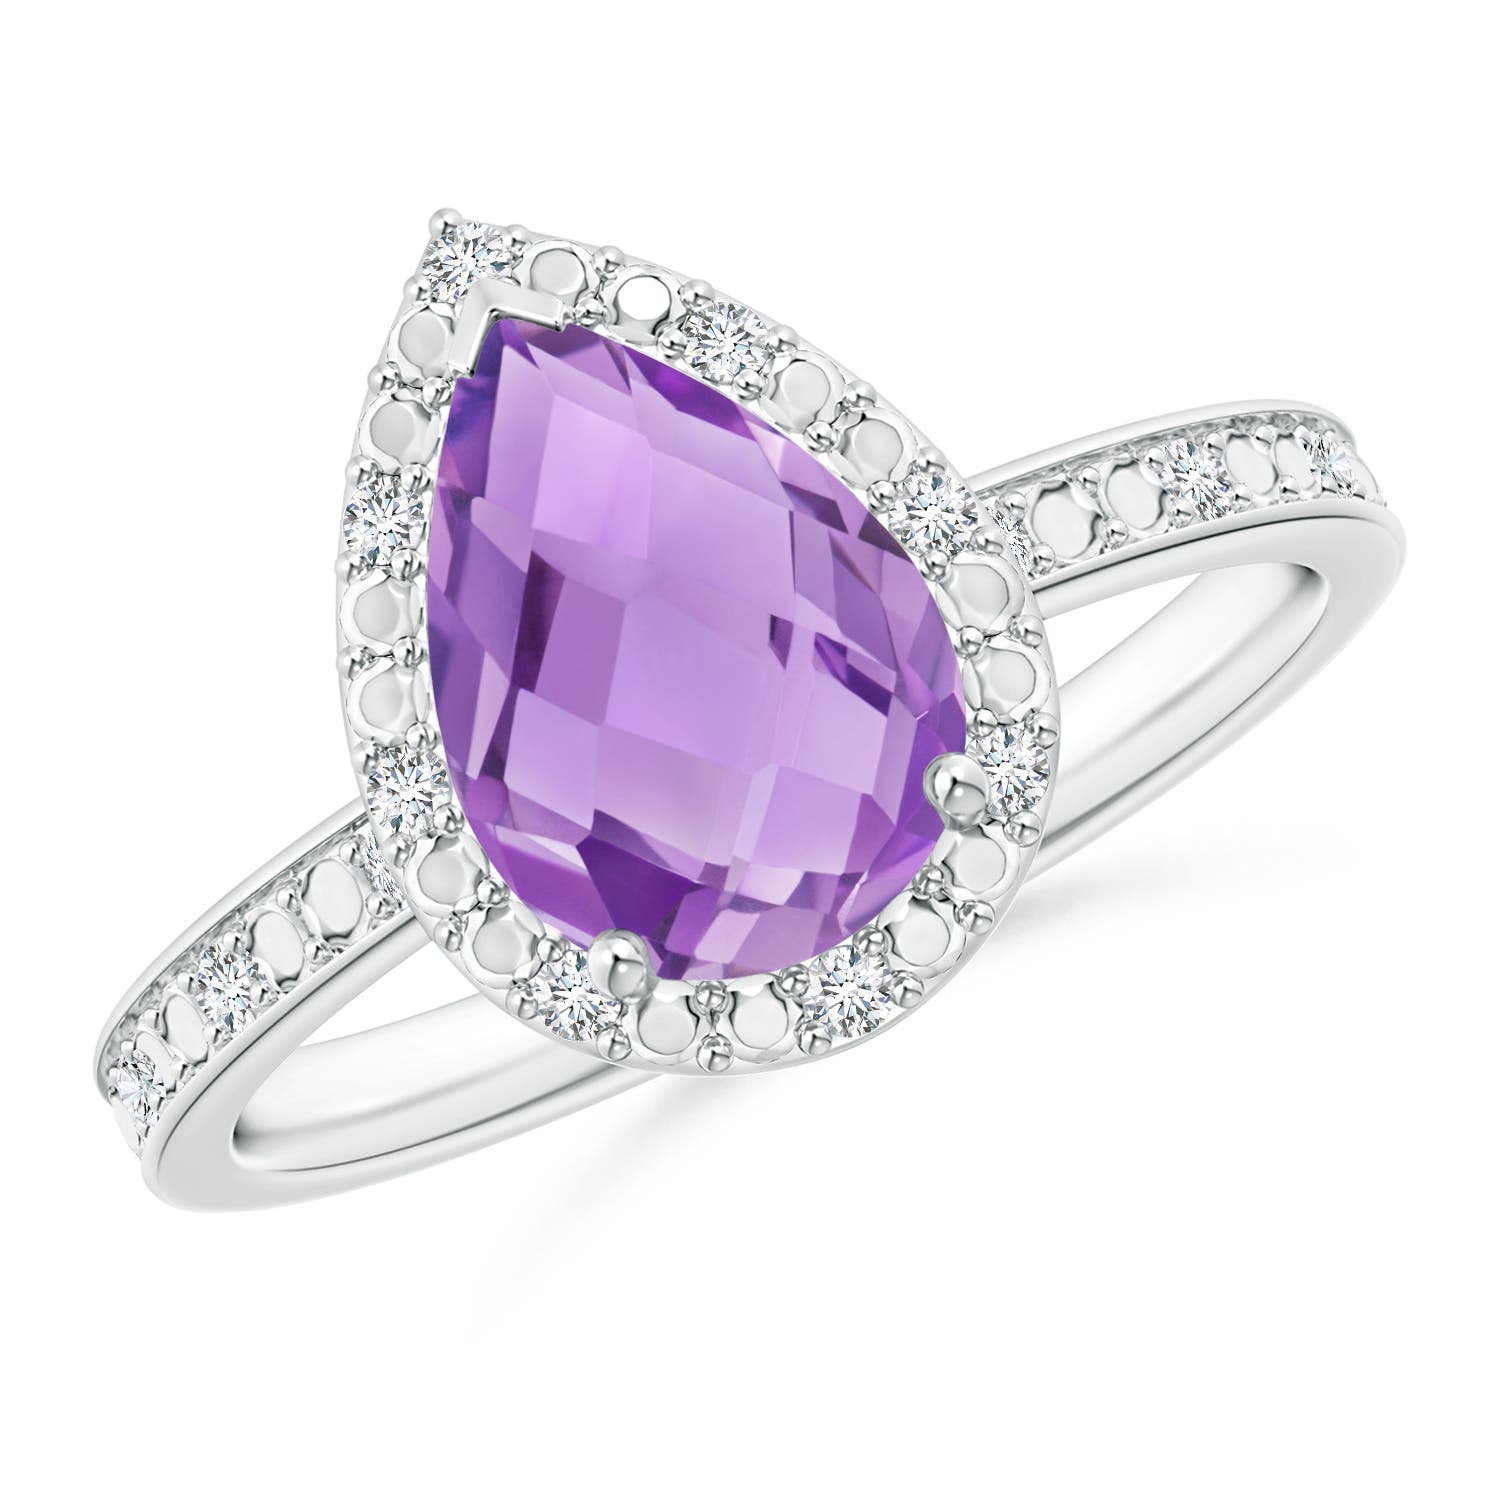 A - Amethyst / 1.68 CT / 14 KT White Gold